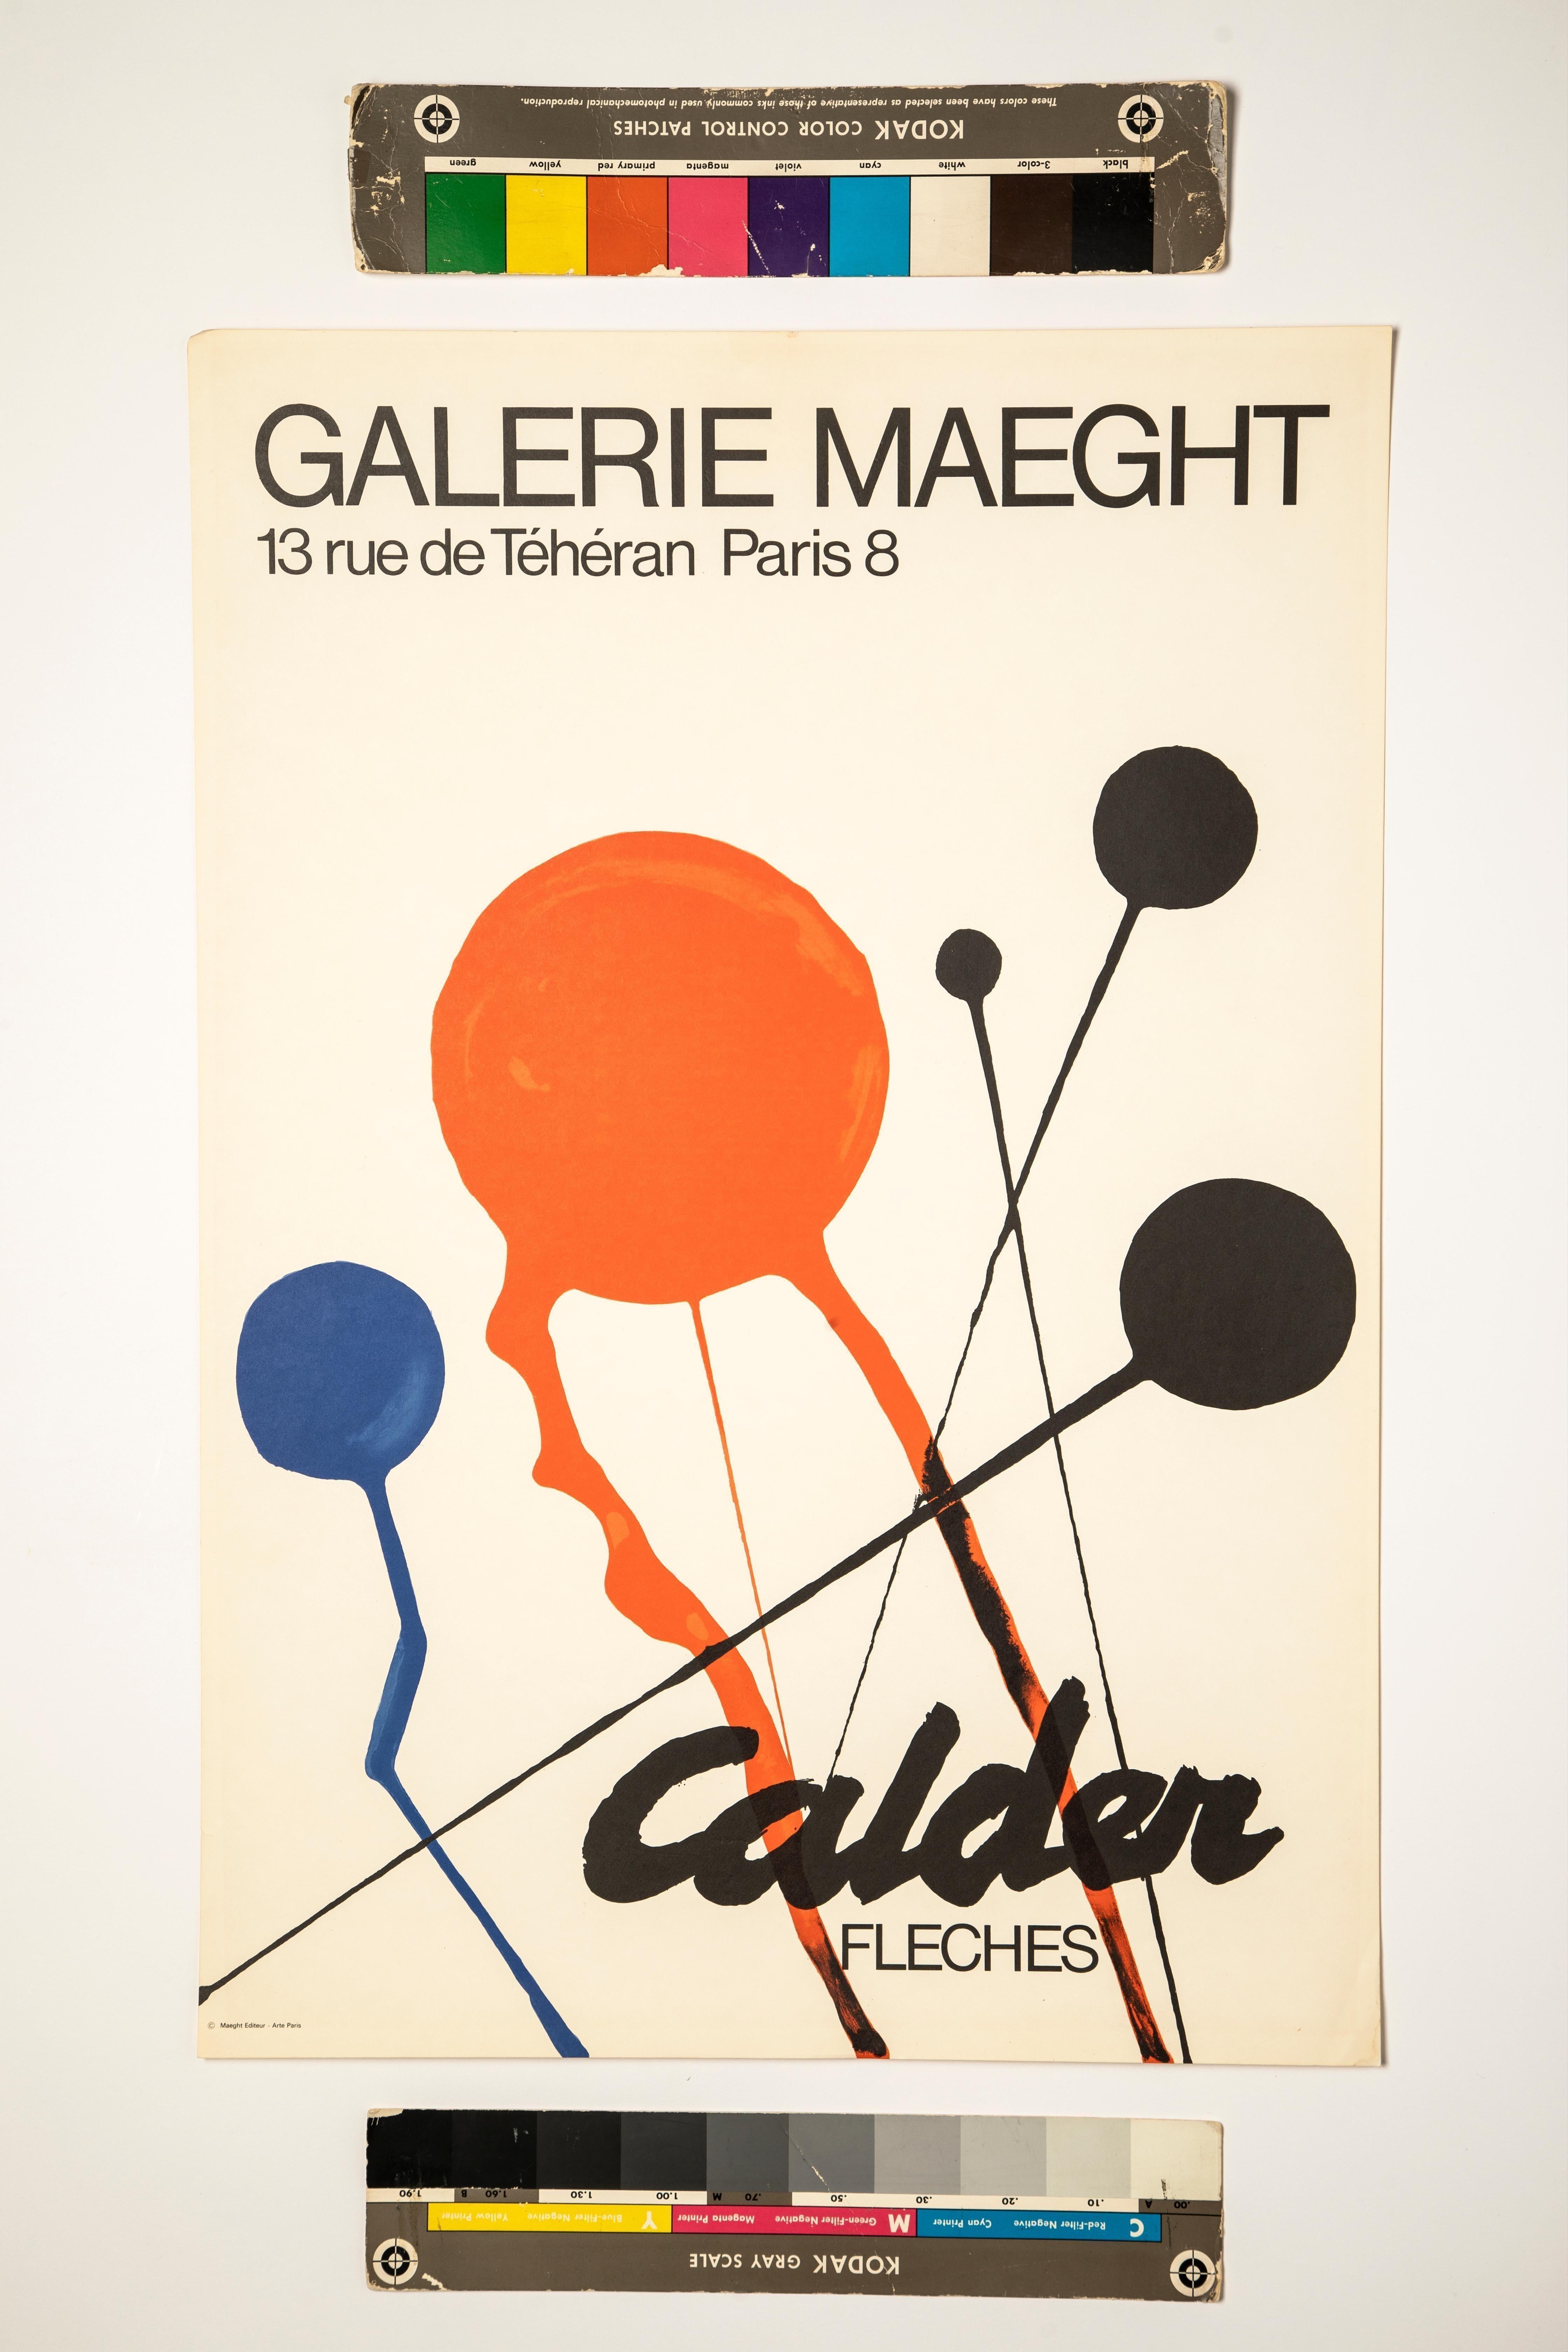 American Alexander Calder - Fleches 'Galerie Maeght', 1970 - Lithographic Poster For Sale